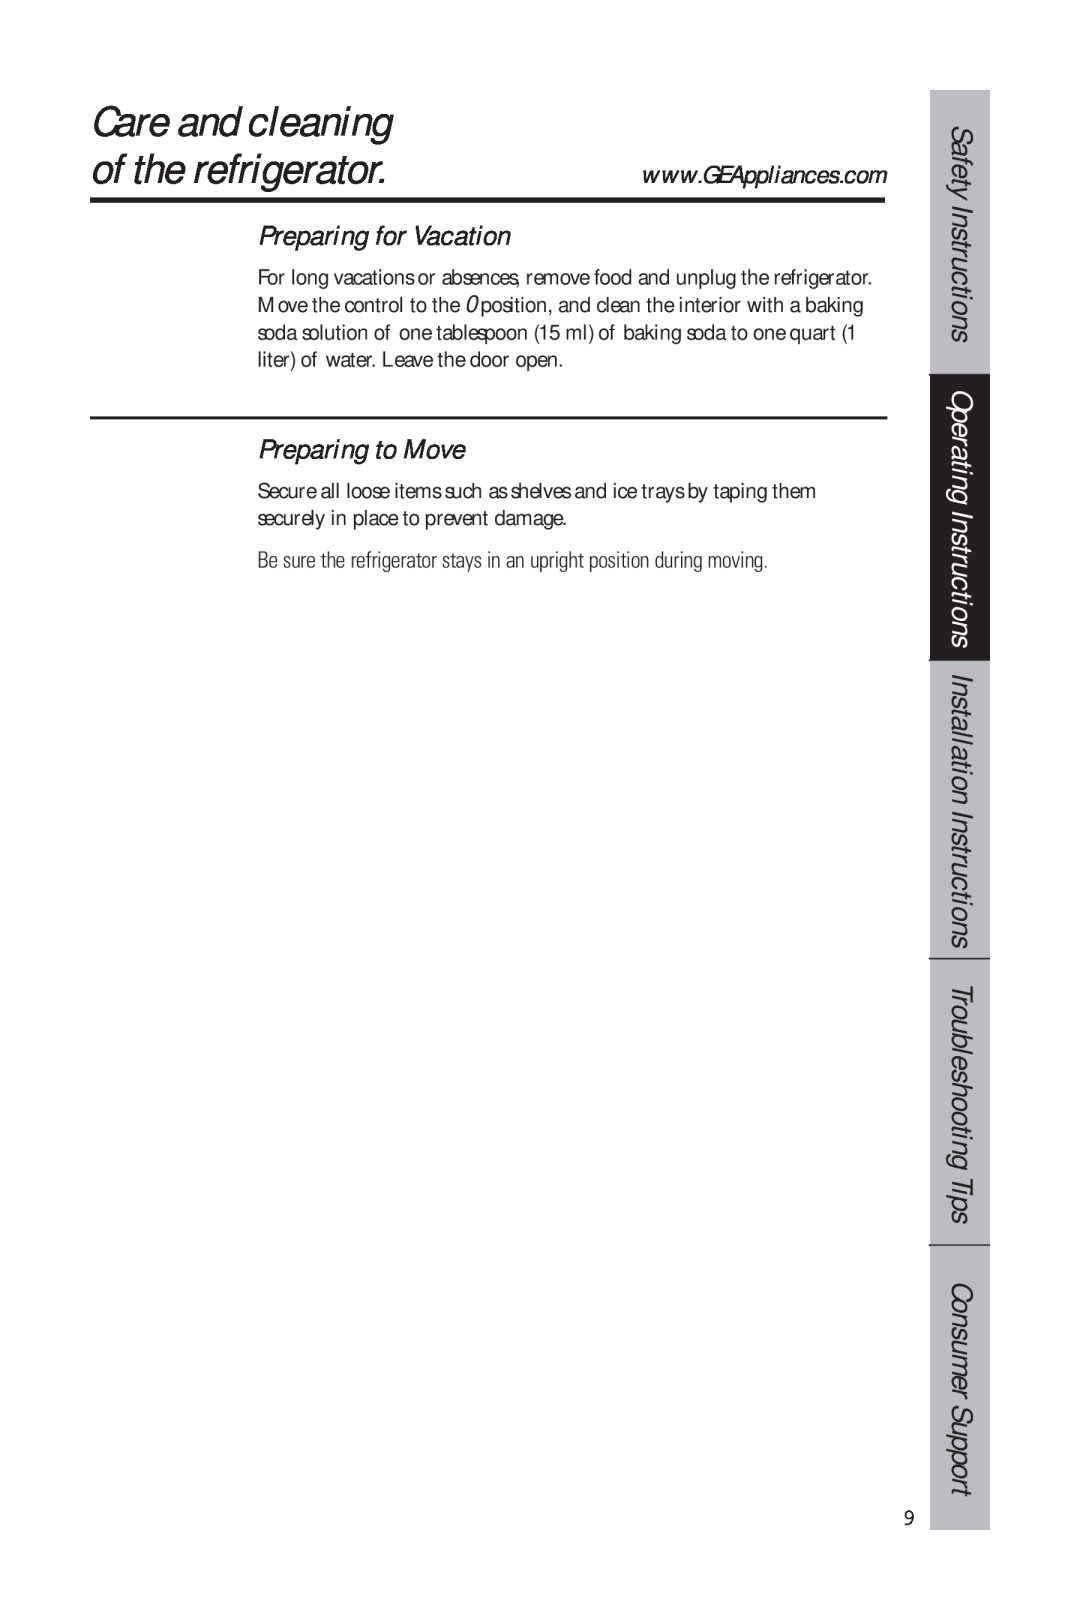 GE 49-60634-1 owner manual Preparing for Vacation, Preparing to Move, Care and cleaning, of the refrigerator 